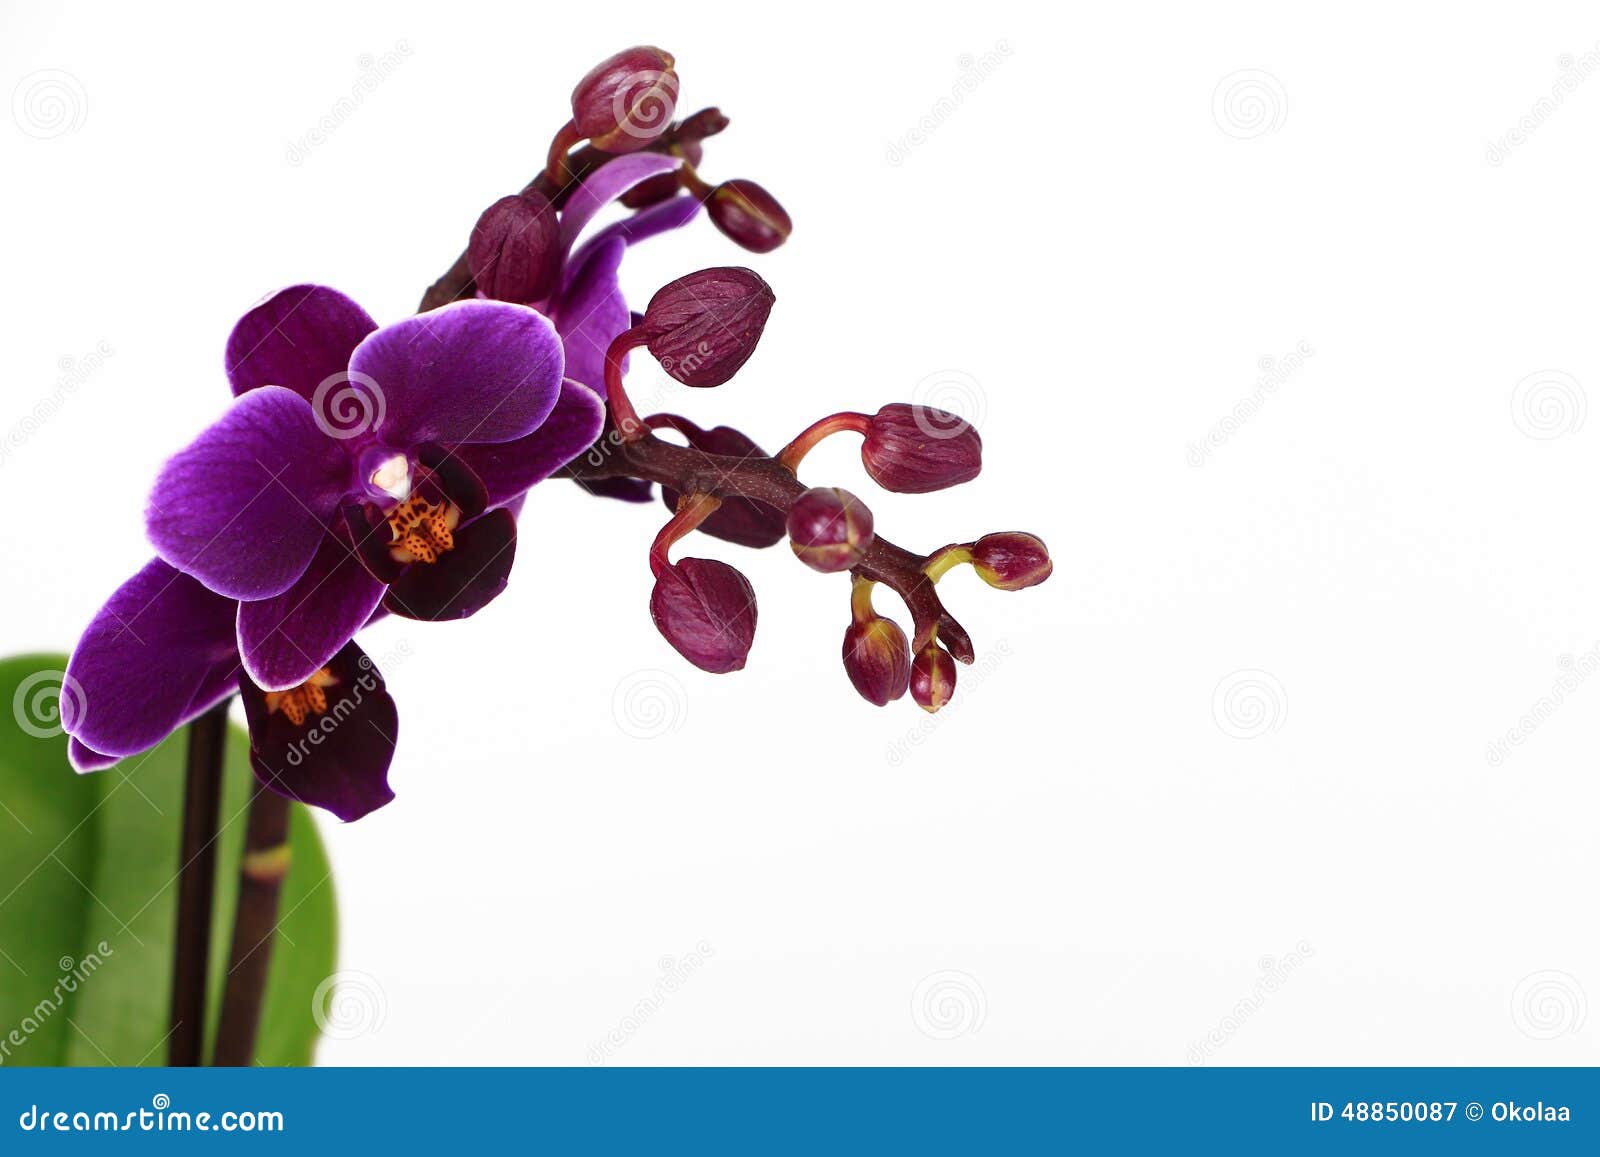 Violet Phalaenopsis Orchid Branch Isolated Stock Image - Image of  beautiful, stem: 48850087